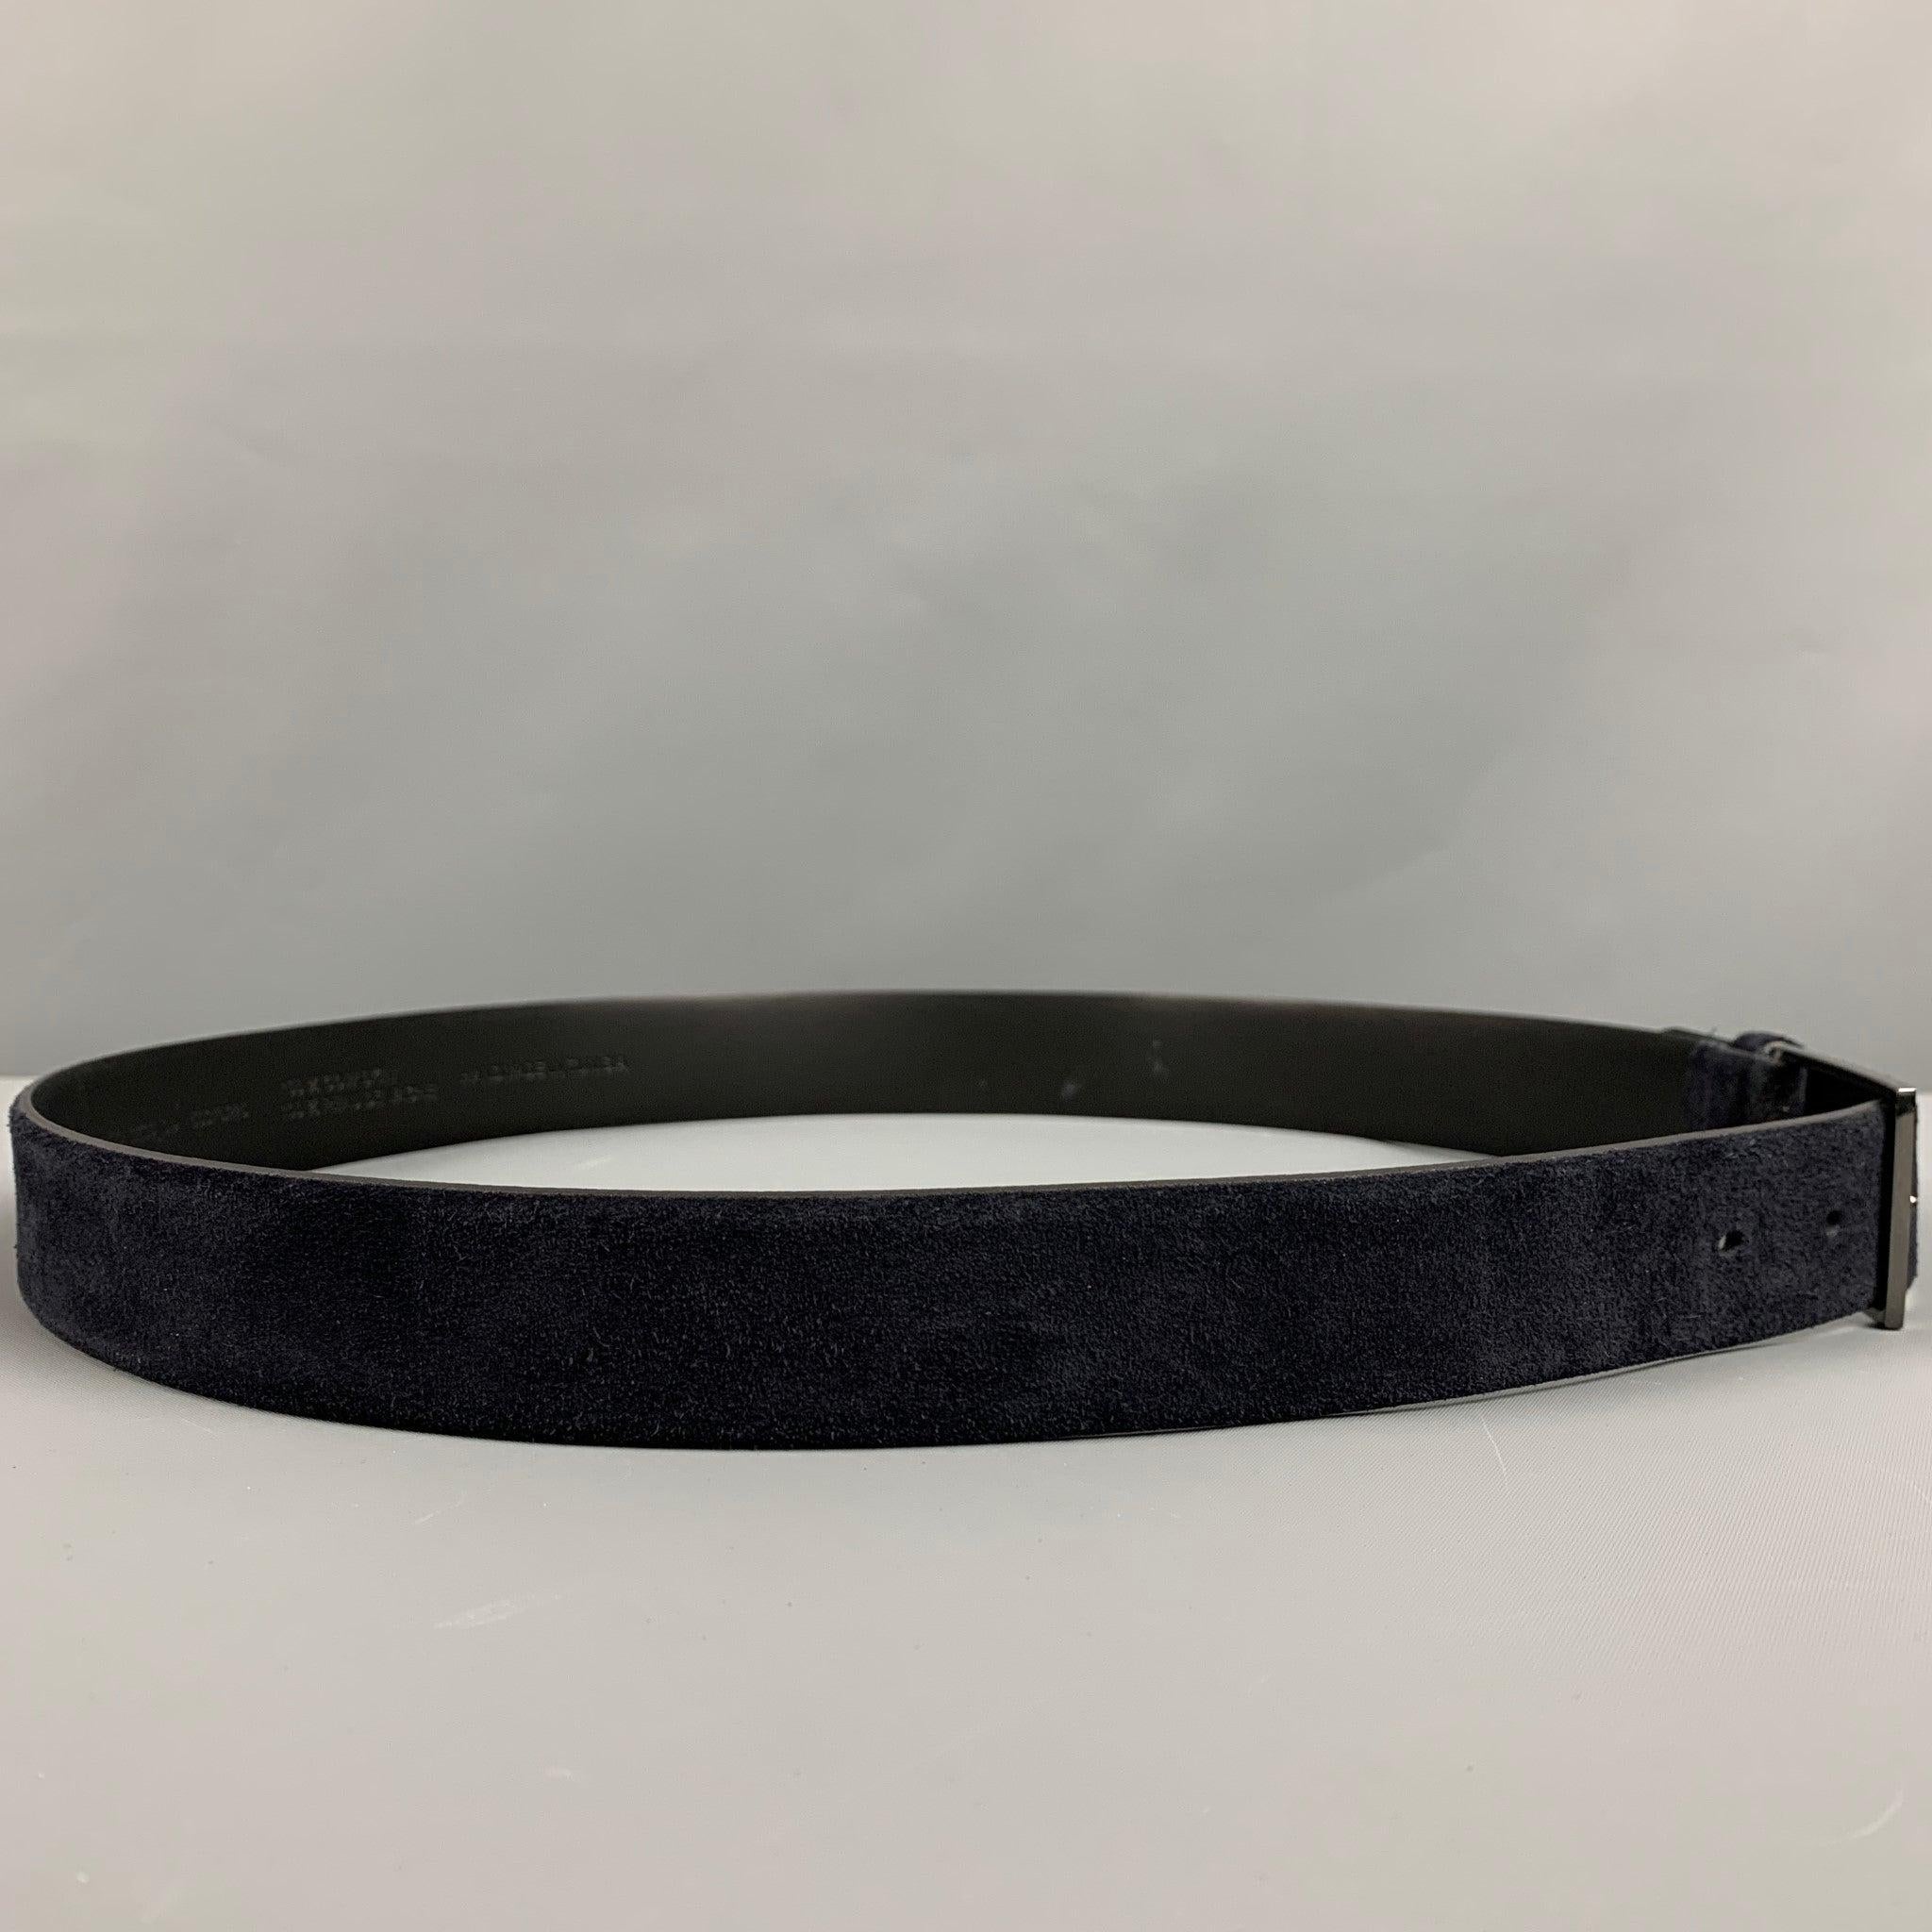 HUGO BOSS belt
in a navy suede fabric featuring gunmetal tone buckle. Handmade.Excellent Pre-Owned Condition. 

Marked:   95-36Length: 42.5 inches  Width: 1 inches  Fits: 35 inches  - 39 inches  Buckle: 2 inches 
  
  
 
Reference: 127881
Category: